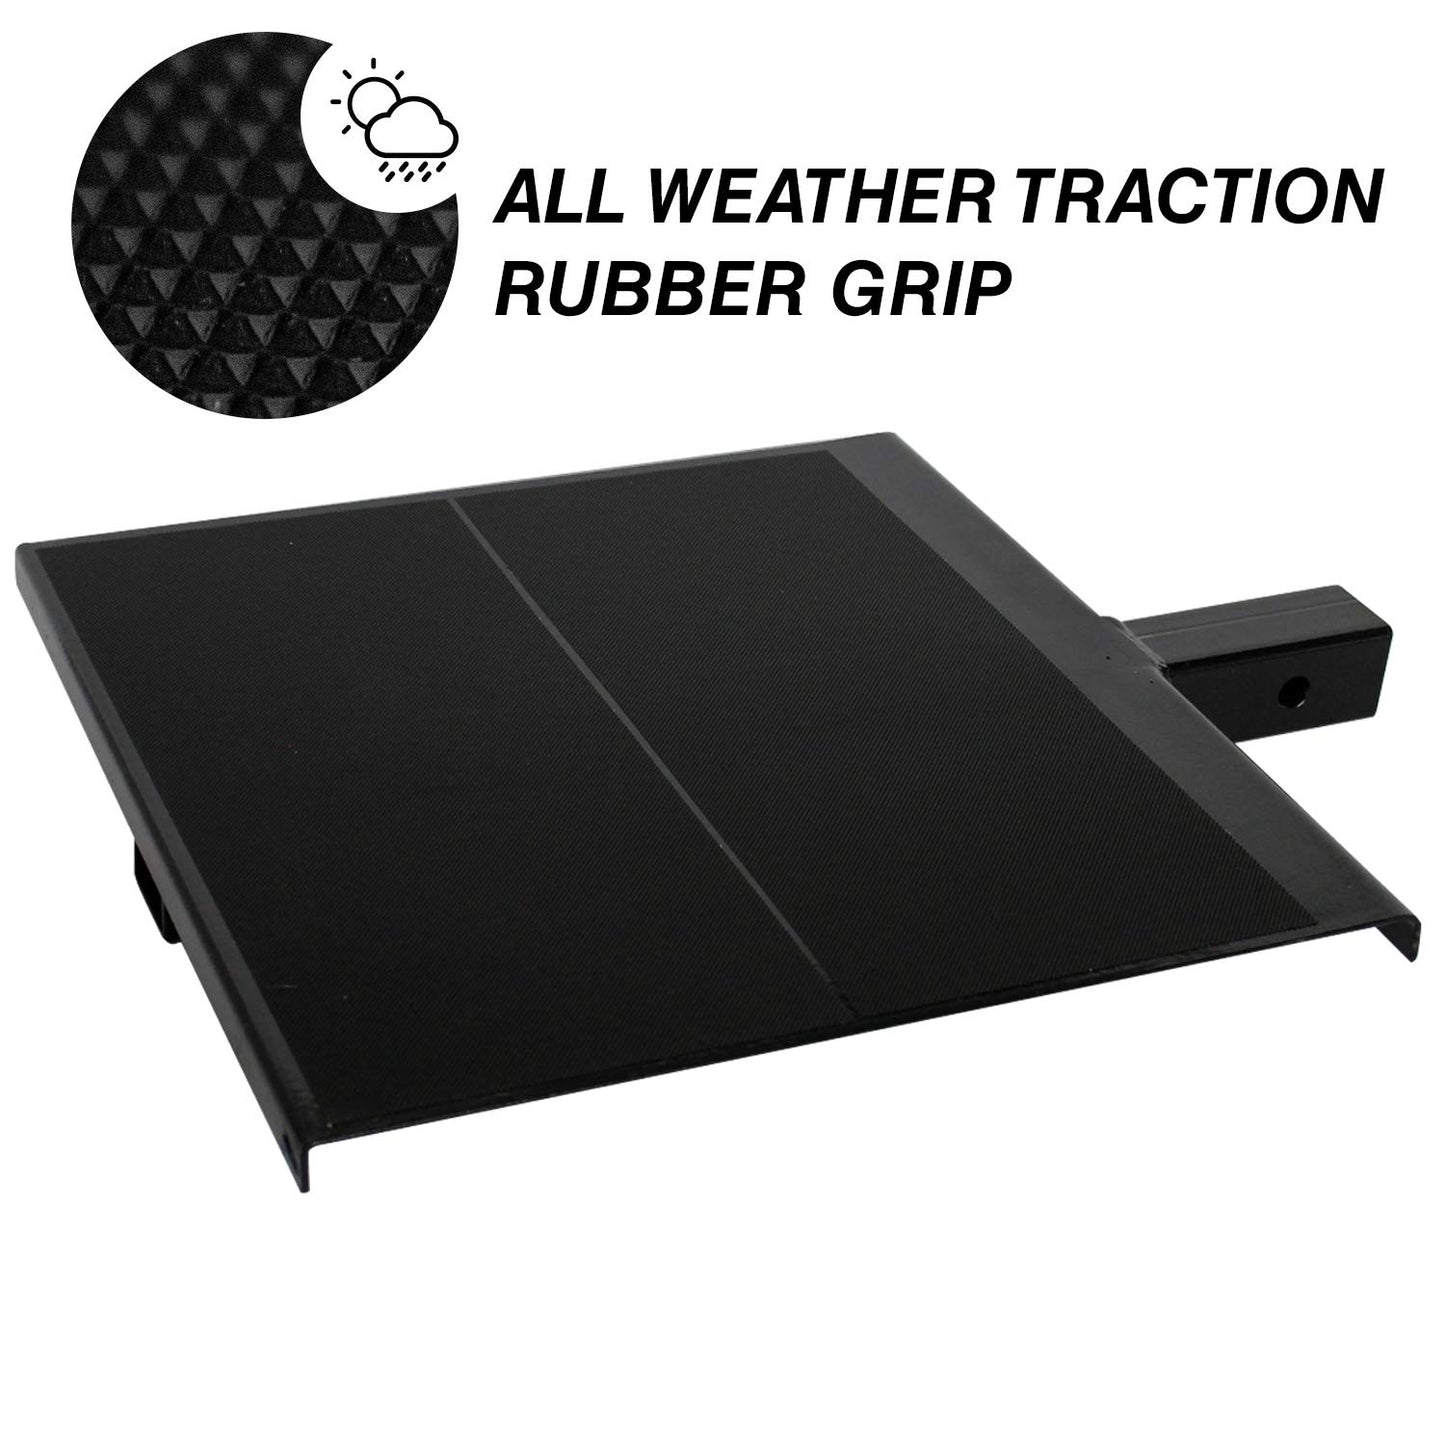 Trailer Hitch Step for dogs - Supports 250+ lbs with All-Weather Grip